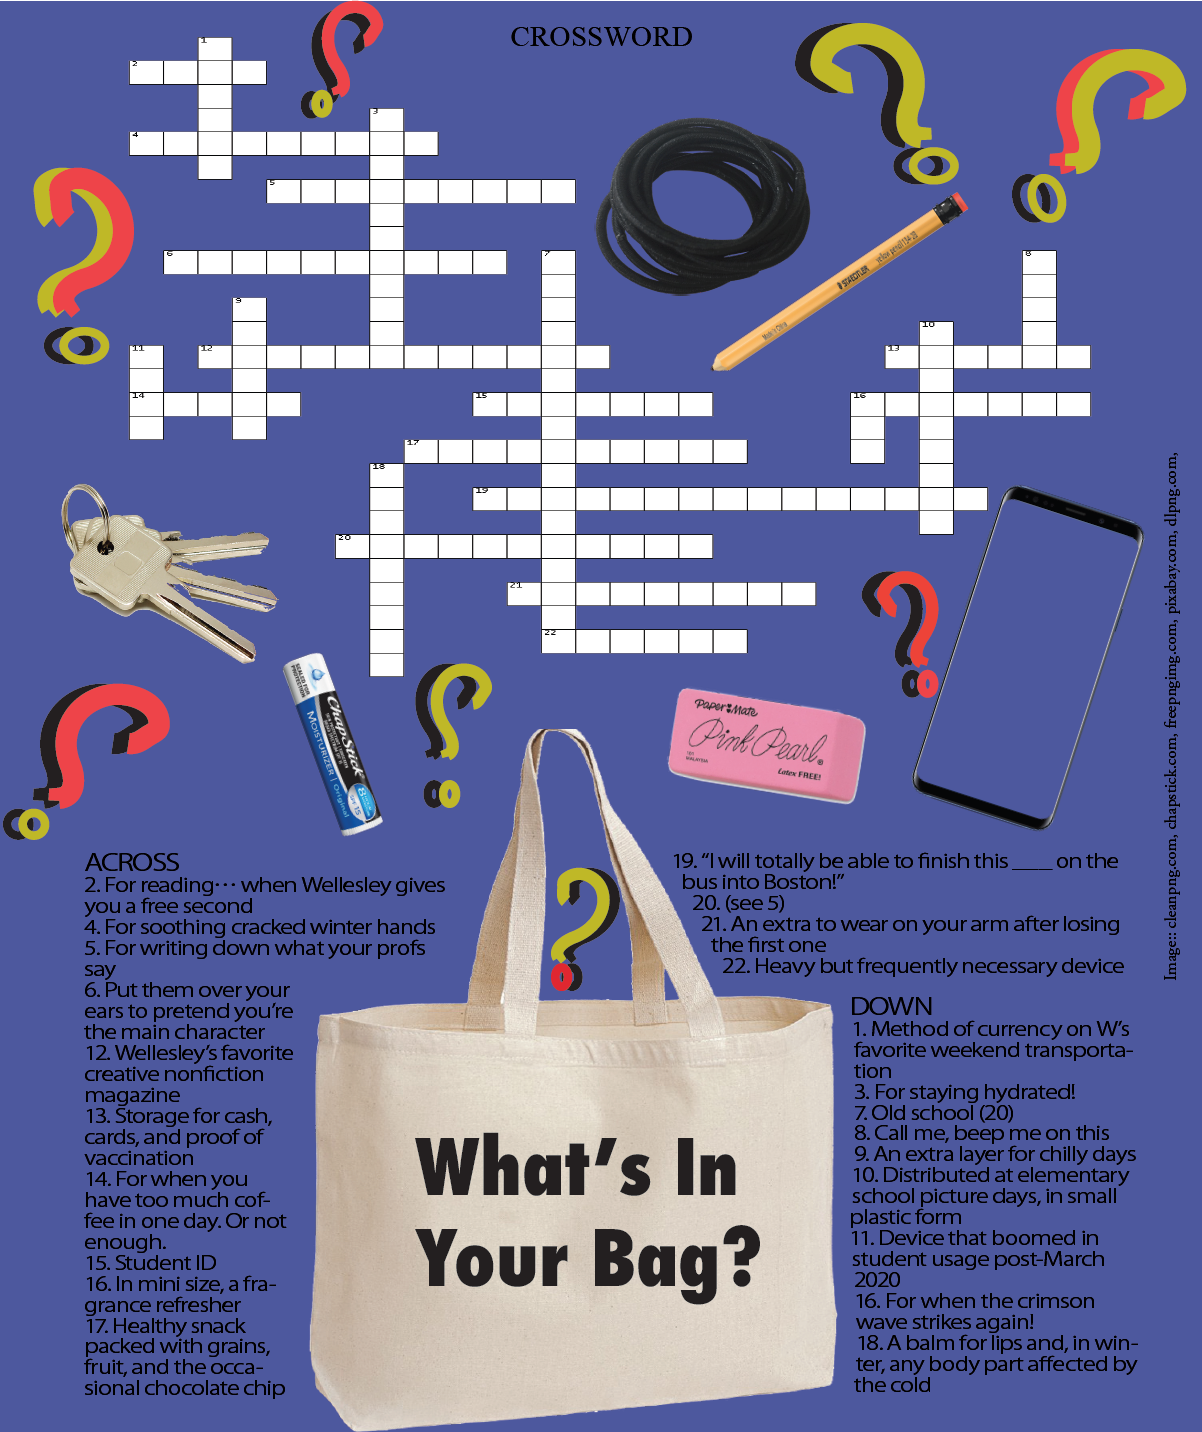 Feb 2022: What's In Your Bag?